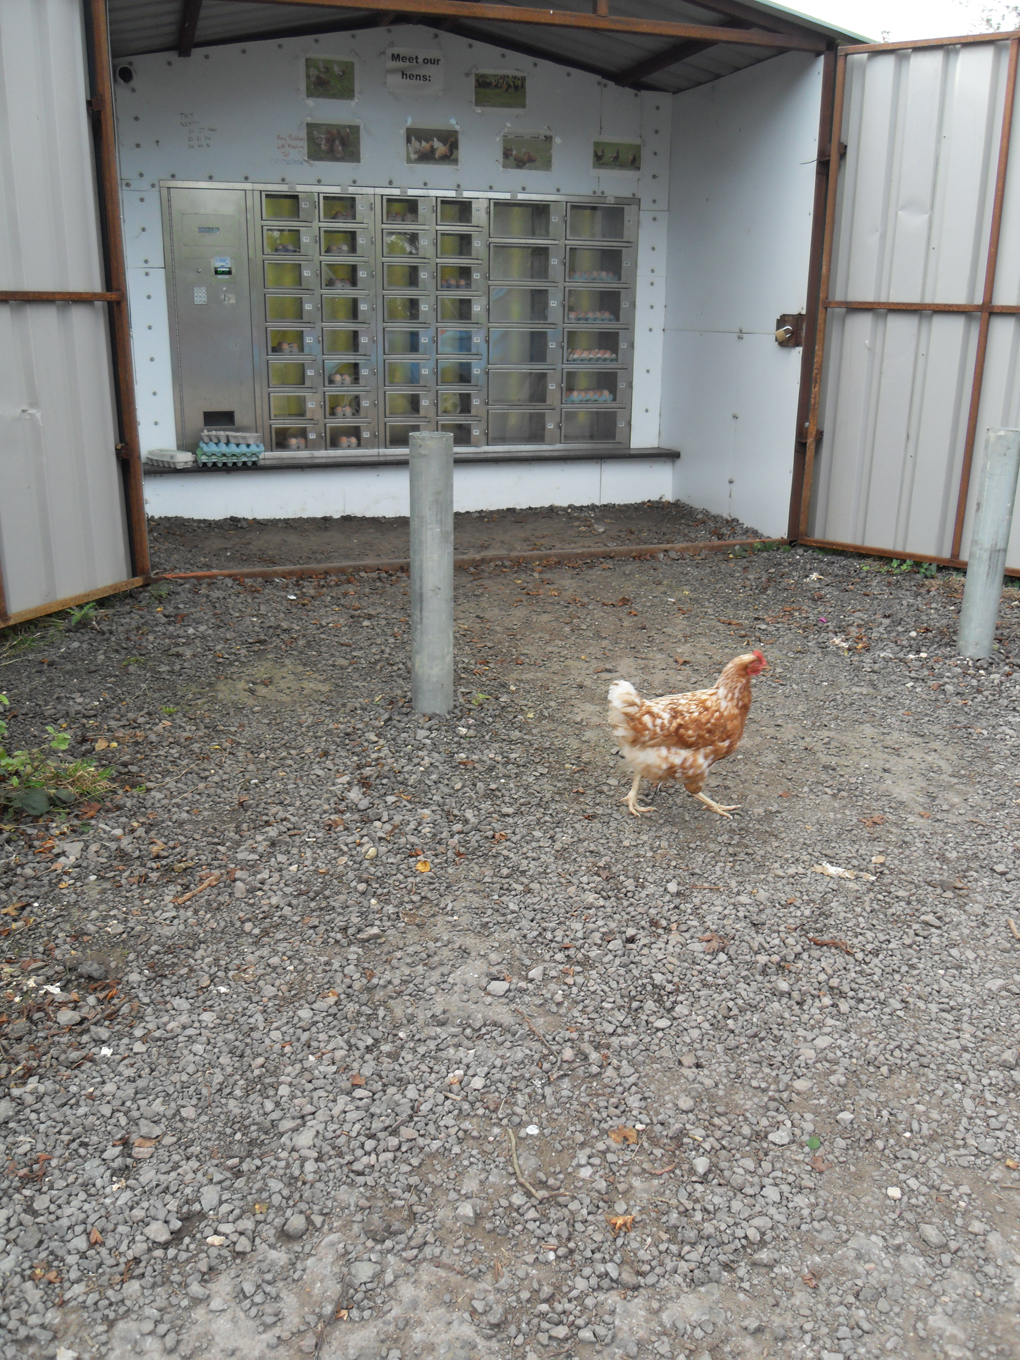 A chicken walking in front of an egg vending machine.